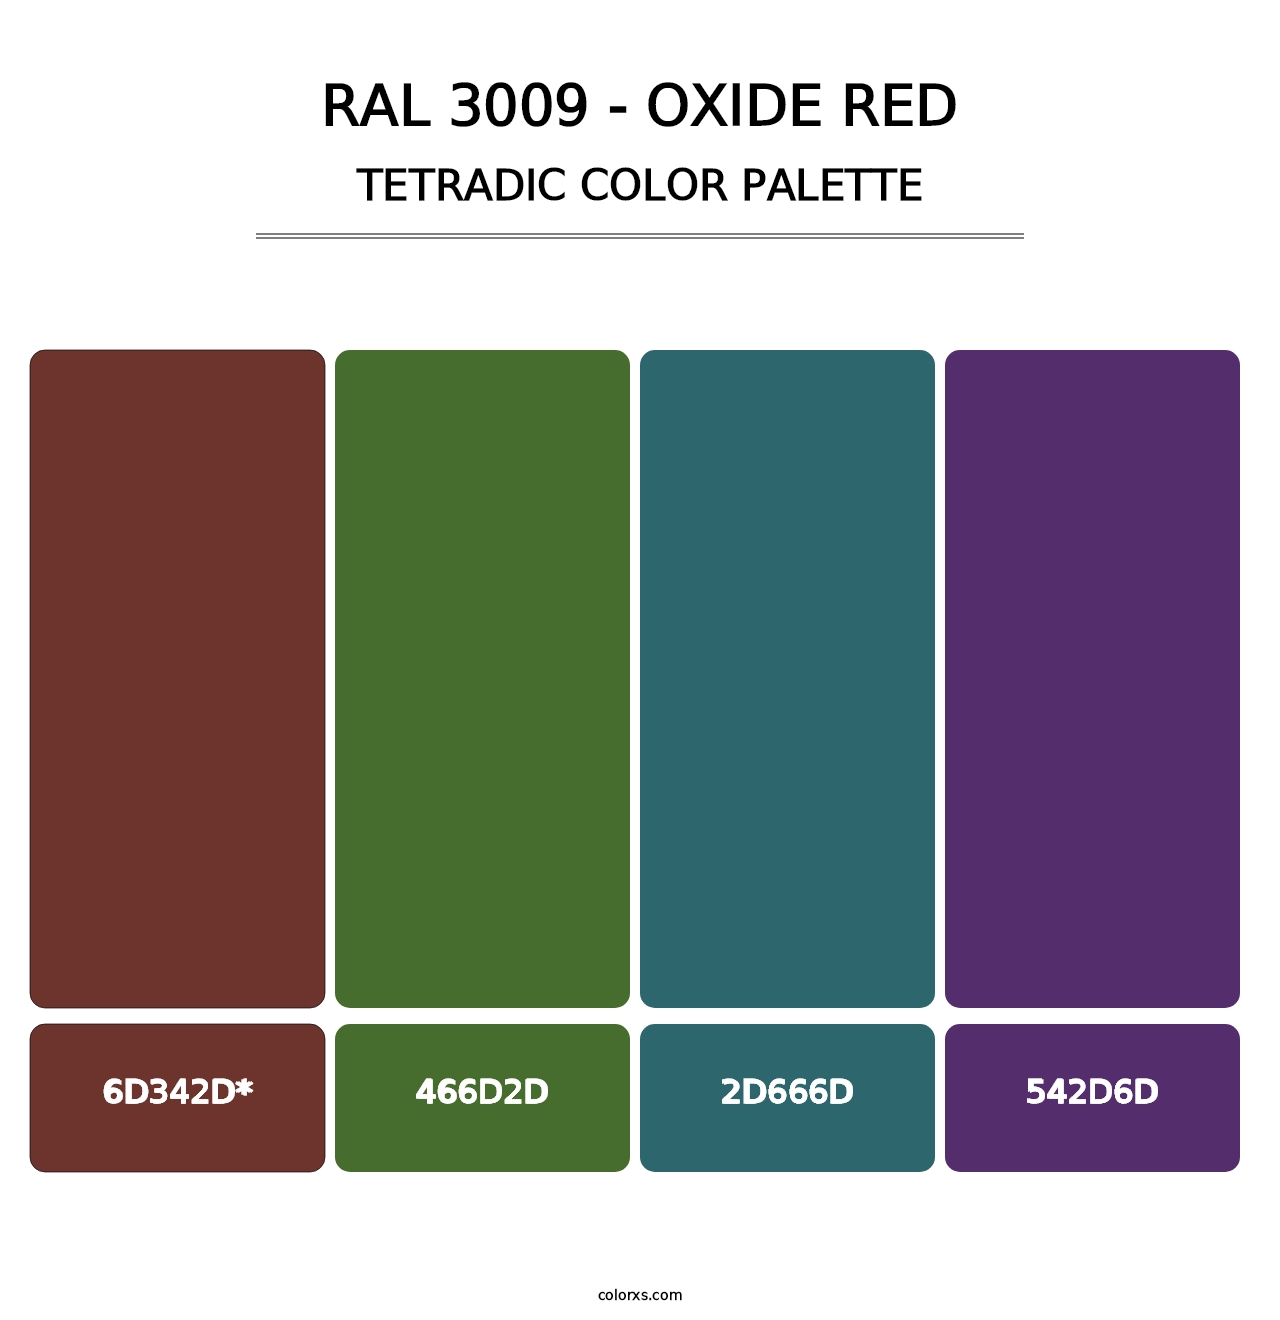 RAL 3009 - Oxide Red - Tetradic Color Palette